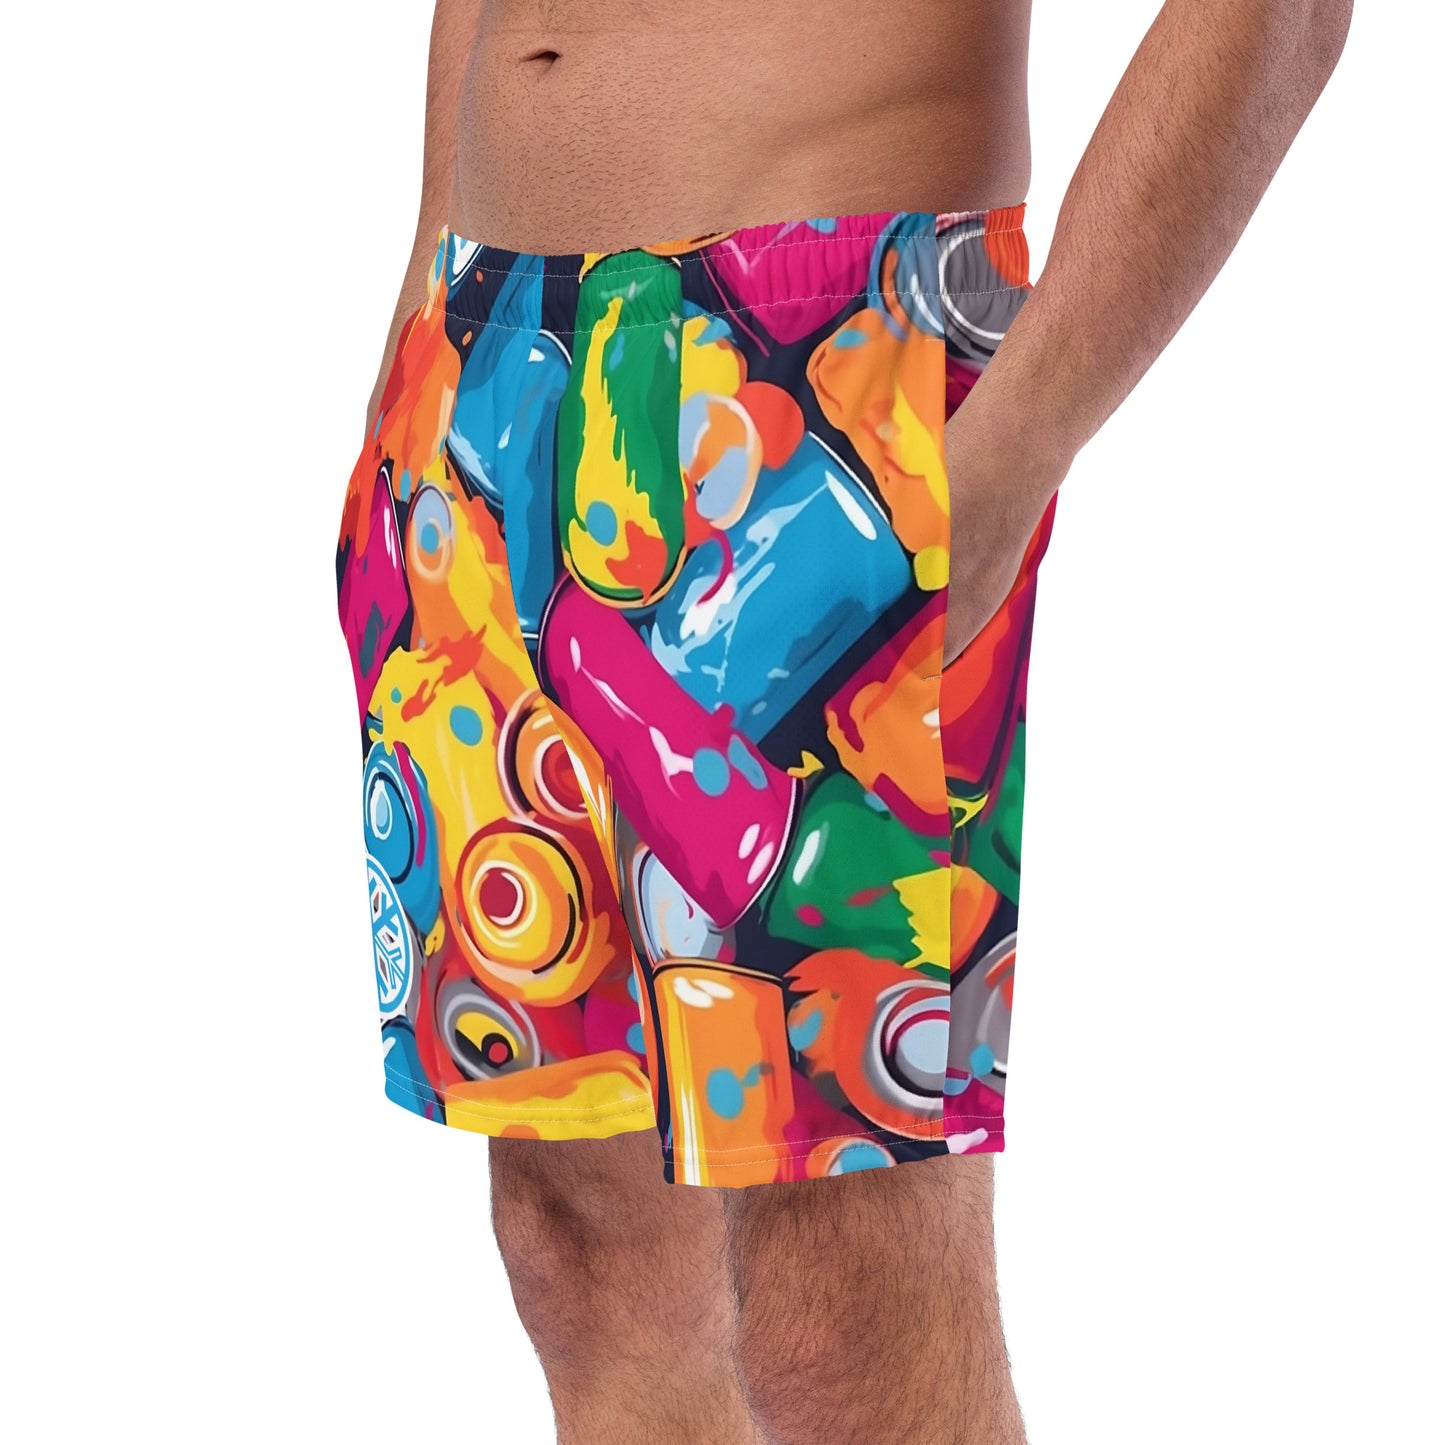 man side with spray cans swim shorts by B.Different Clothing independent streetwear inspired by street art graffiti